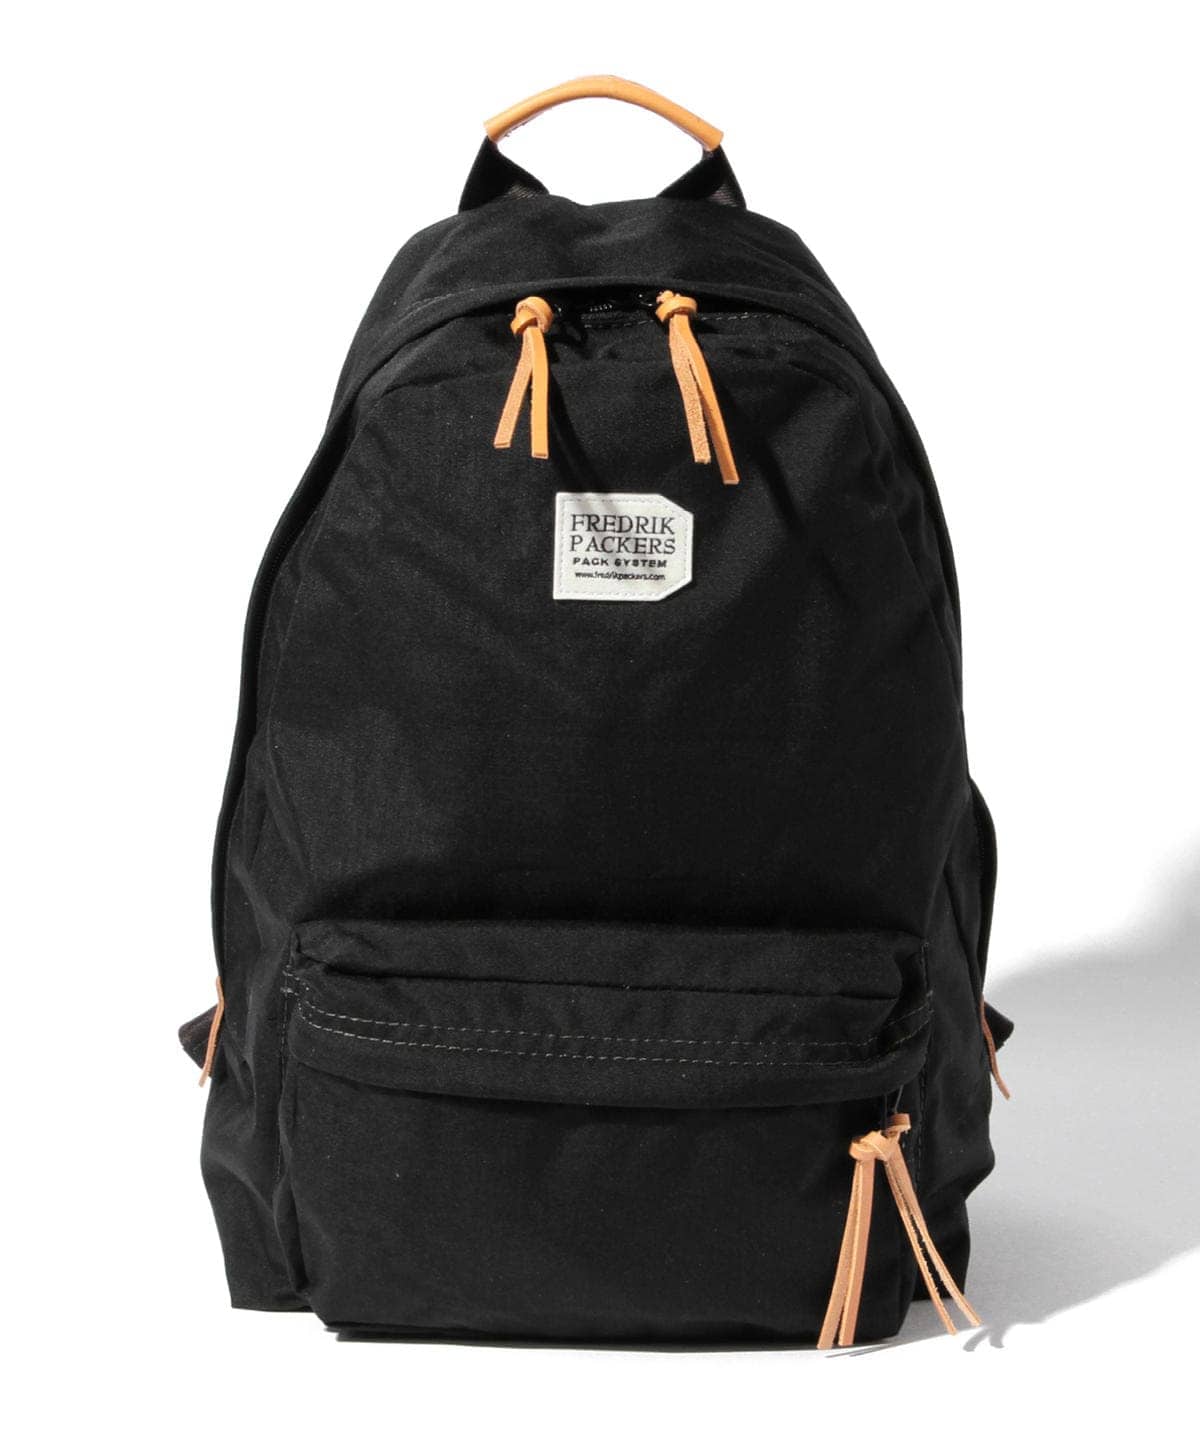 TOKYO CULTUART by BEAMS（トーキョー カルチャート by ビームス）【一部予約】FREDRIK PACKERS / 500D  DAY PACK（バッグ リュック・バックパック）通販｜BEAMS